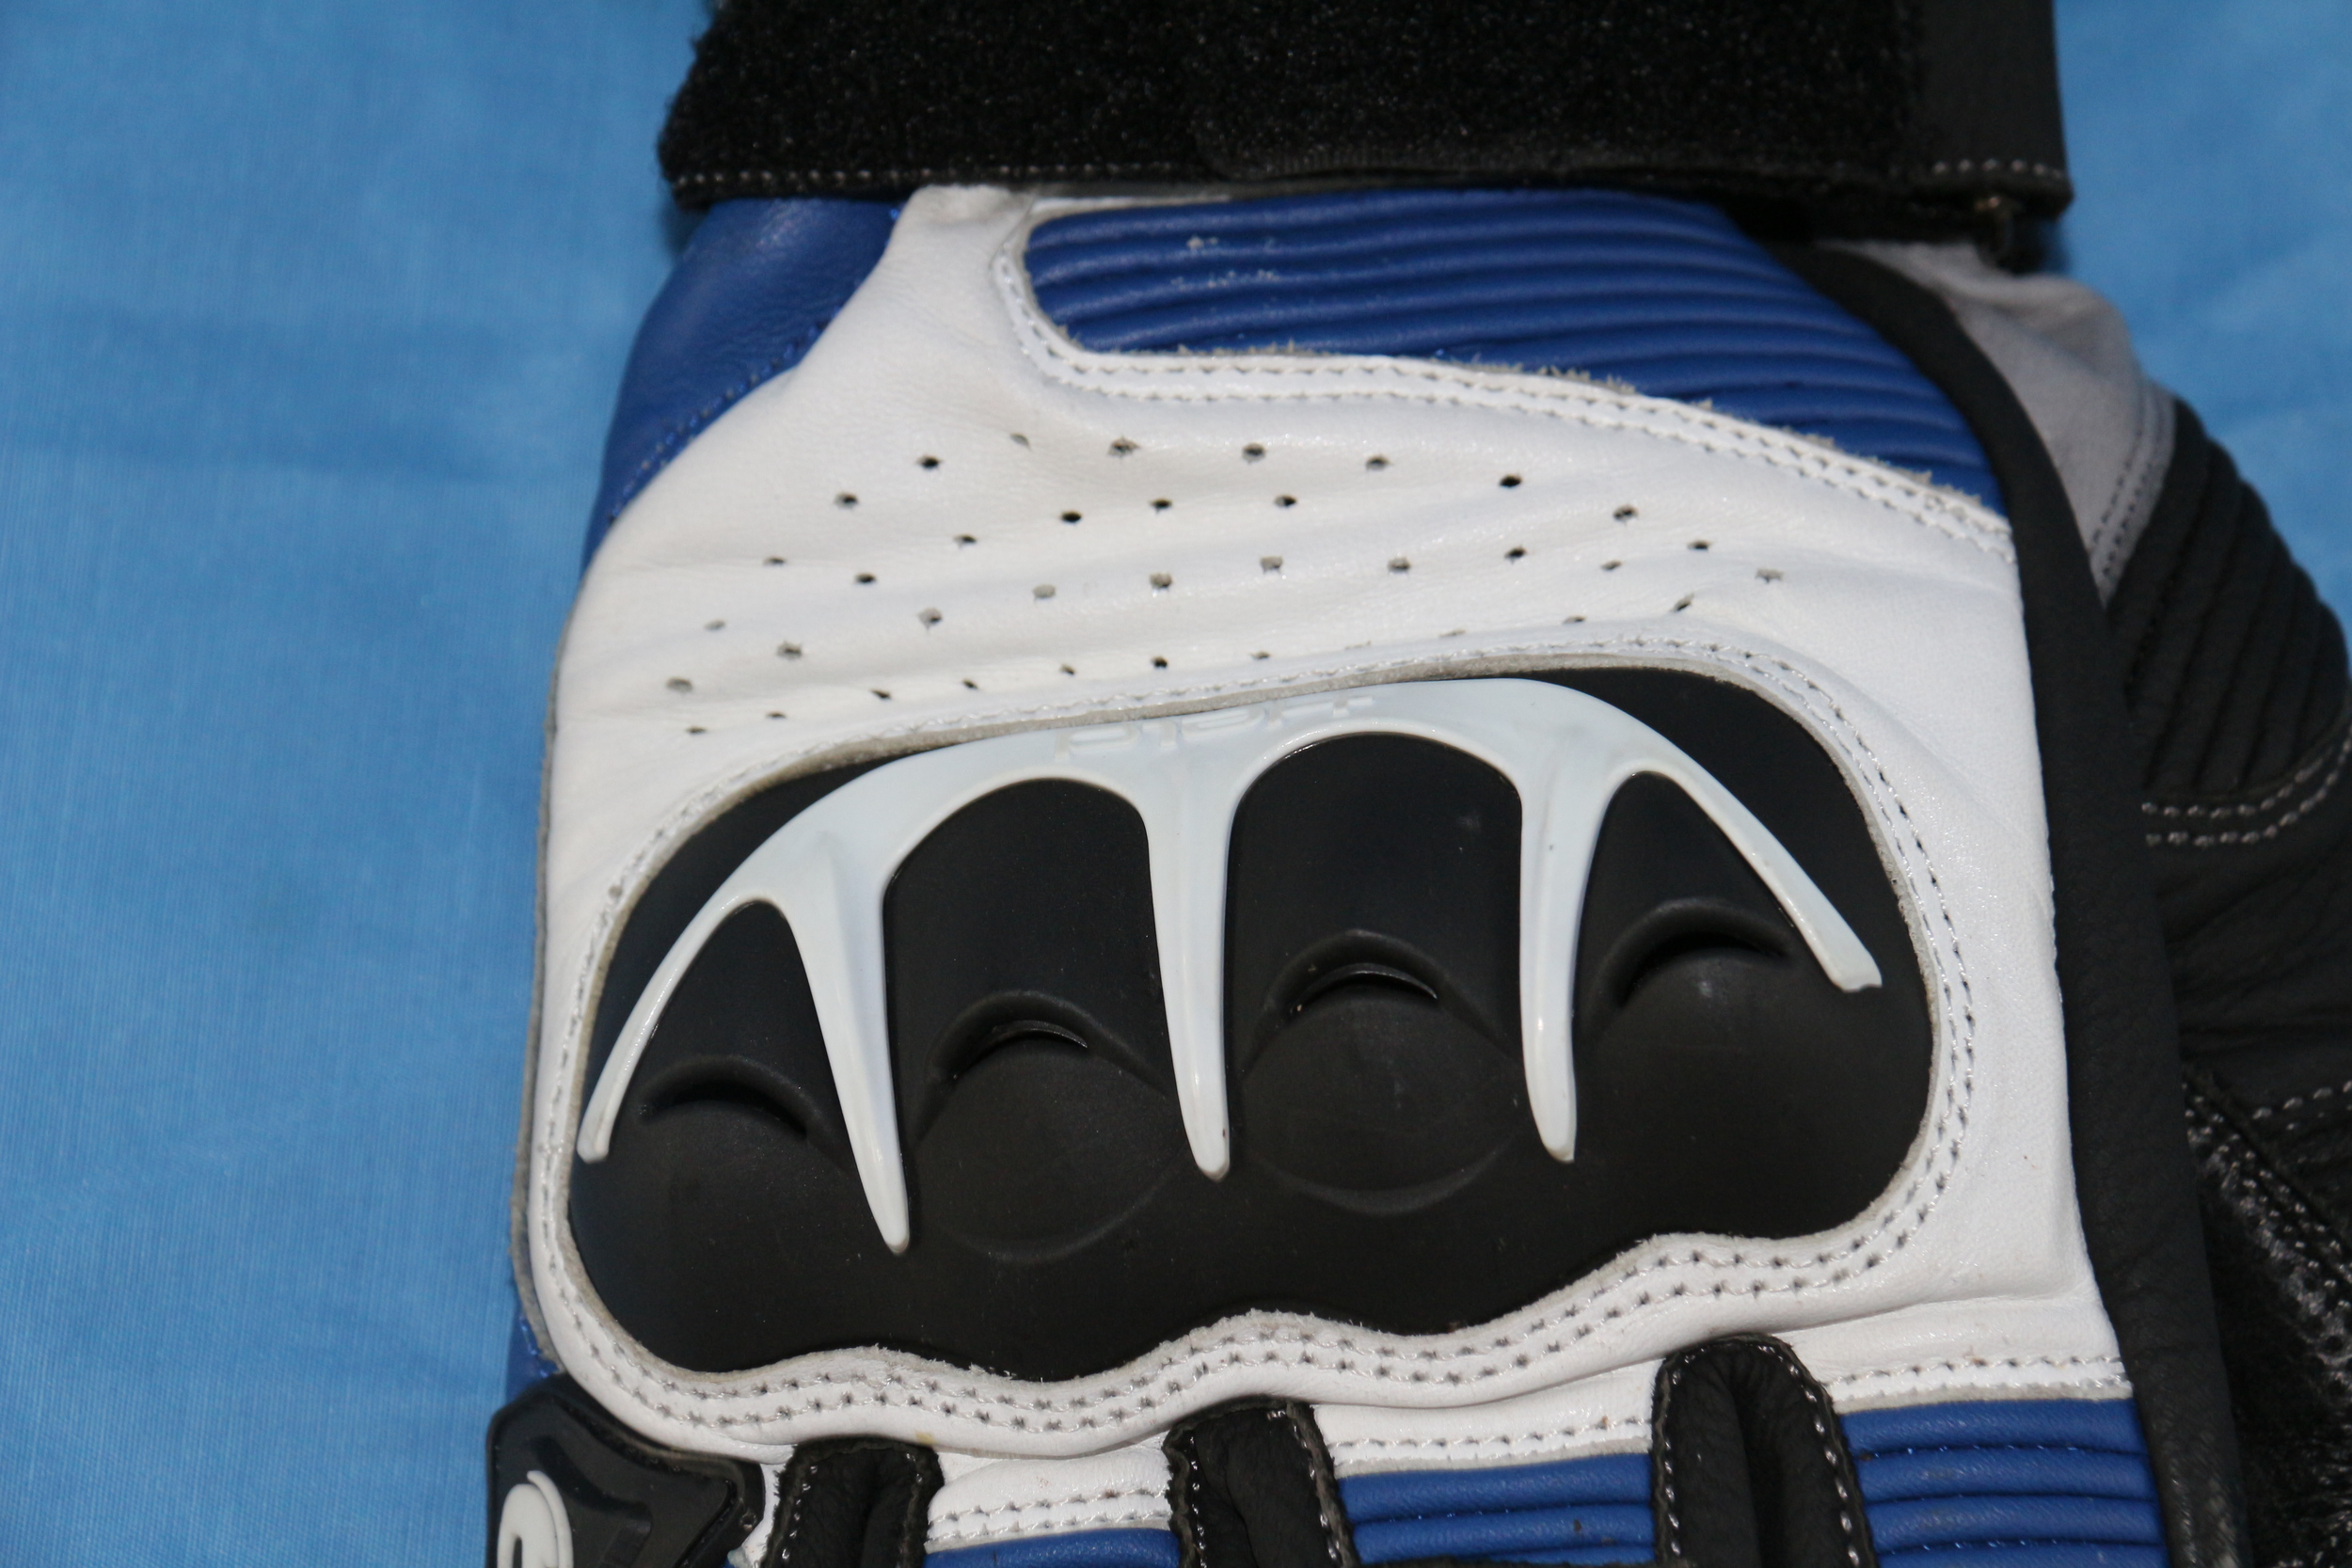 Knuckle Protector and Perforation